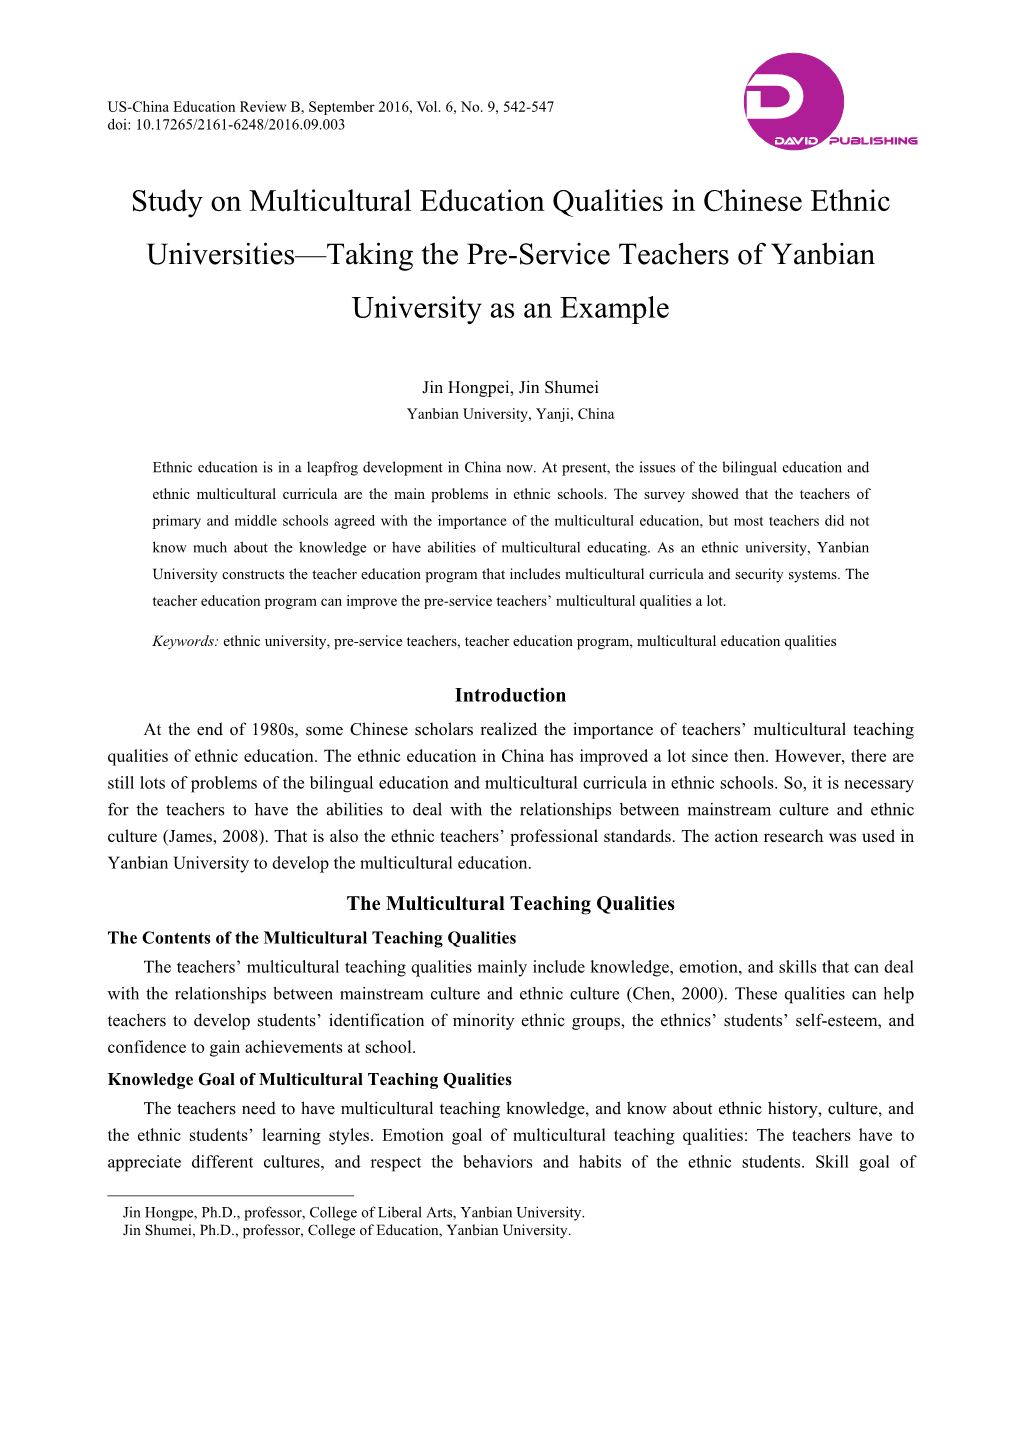 Study on Multicultural Education Qualities in Chinese Ethnic Universities—Taking the Pre-Service Teachers of Yanbian University As an Example